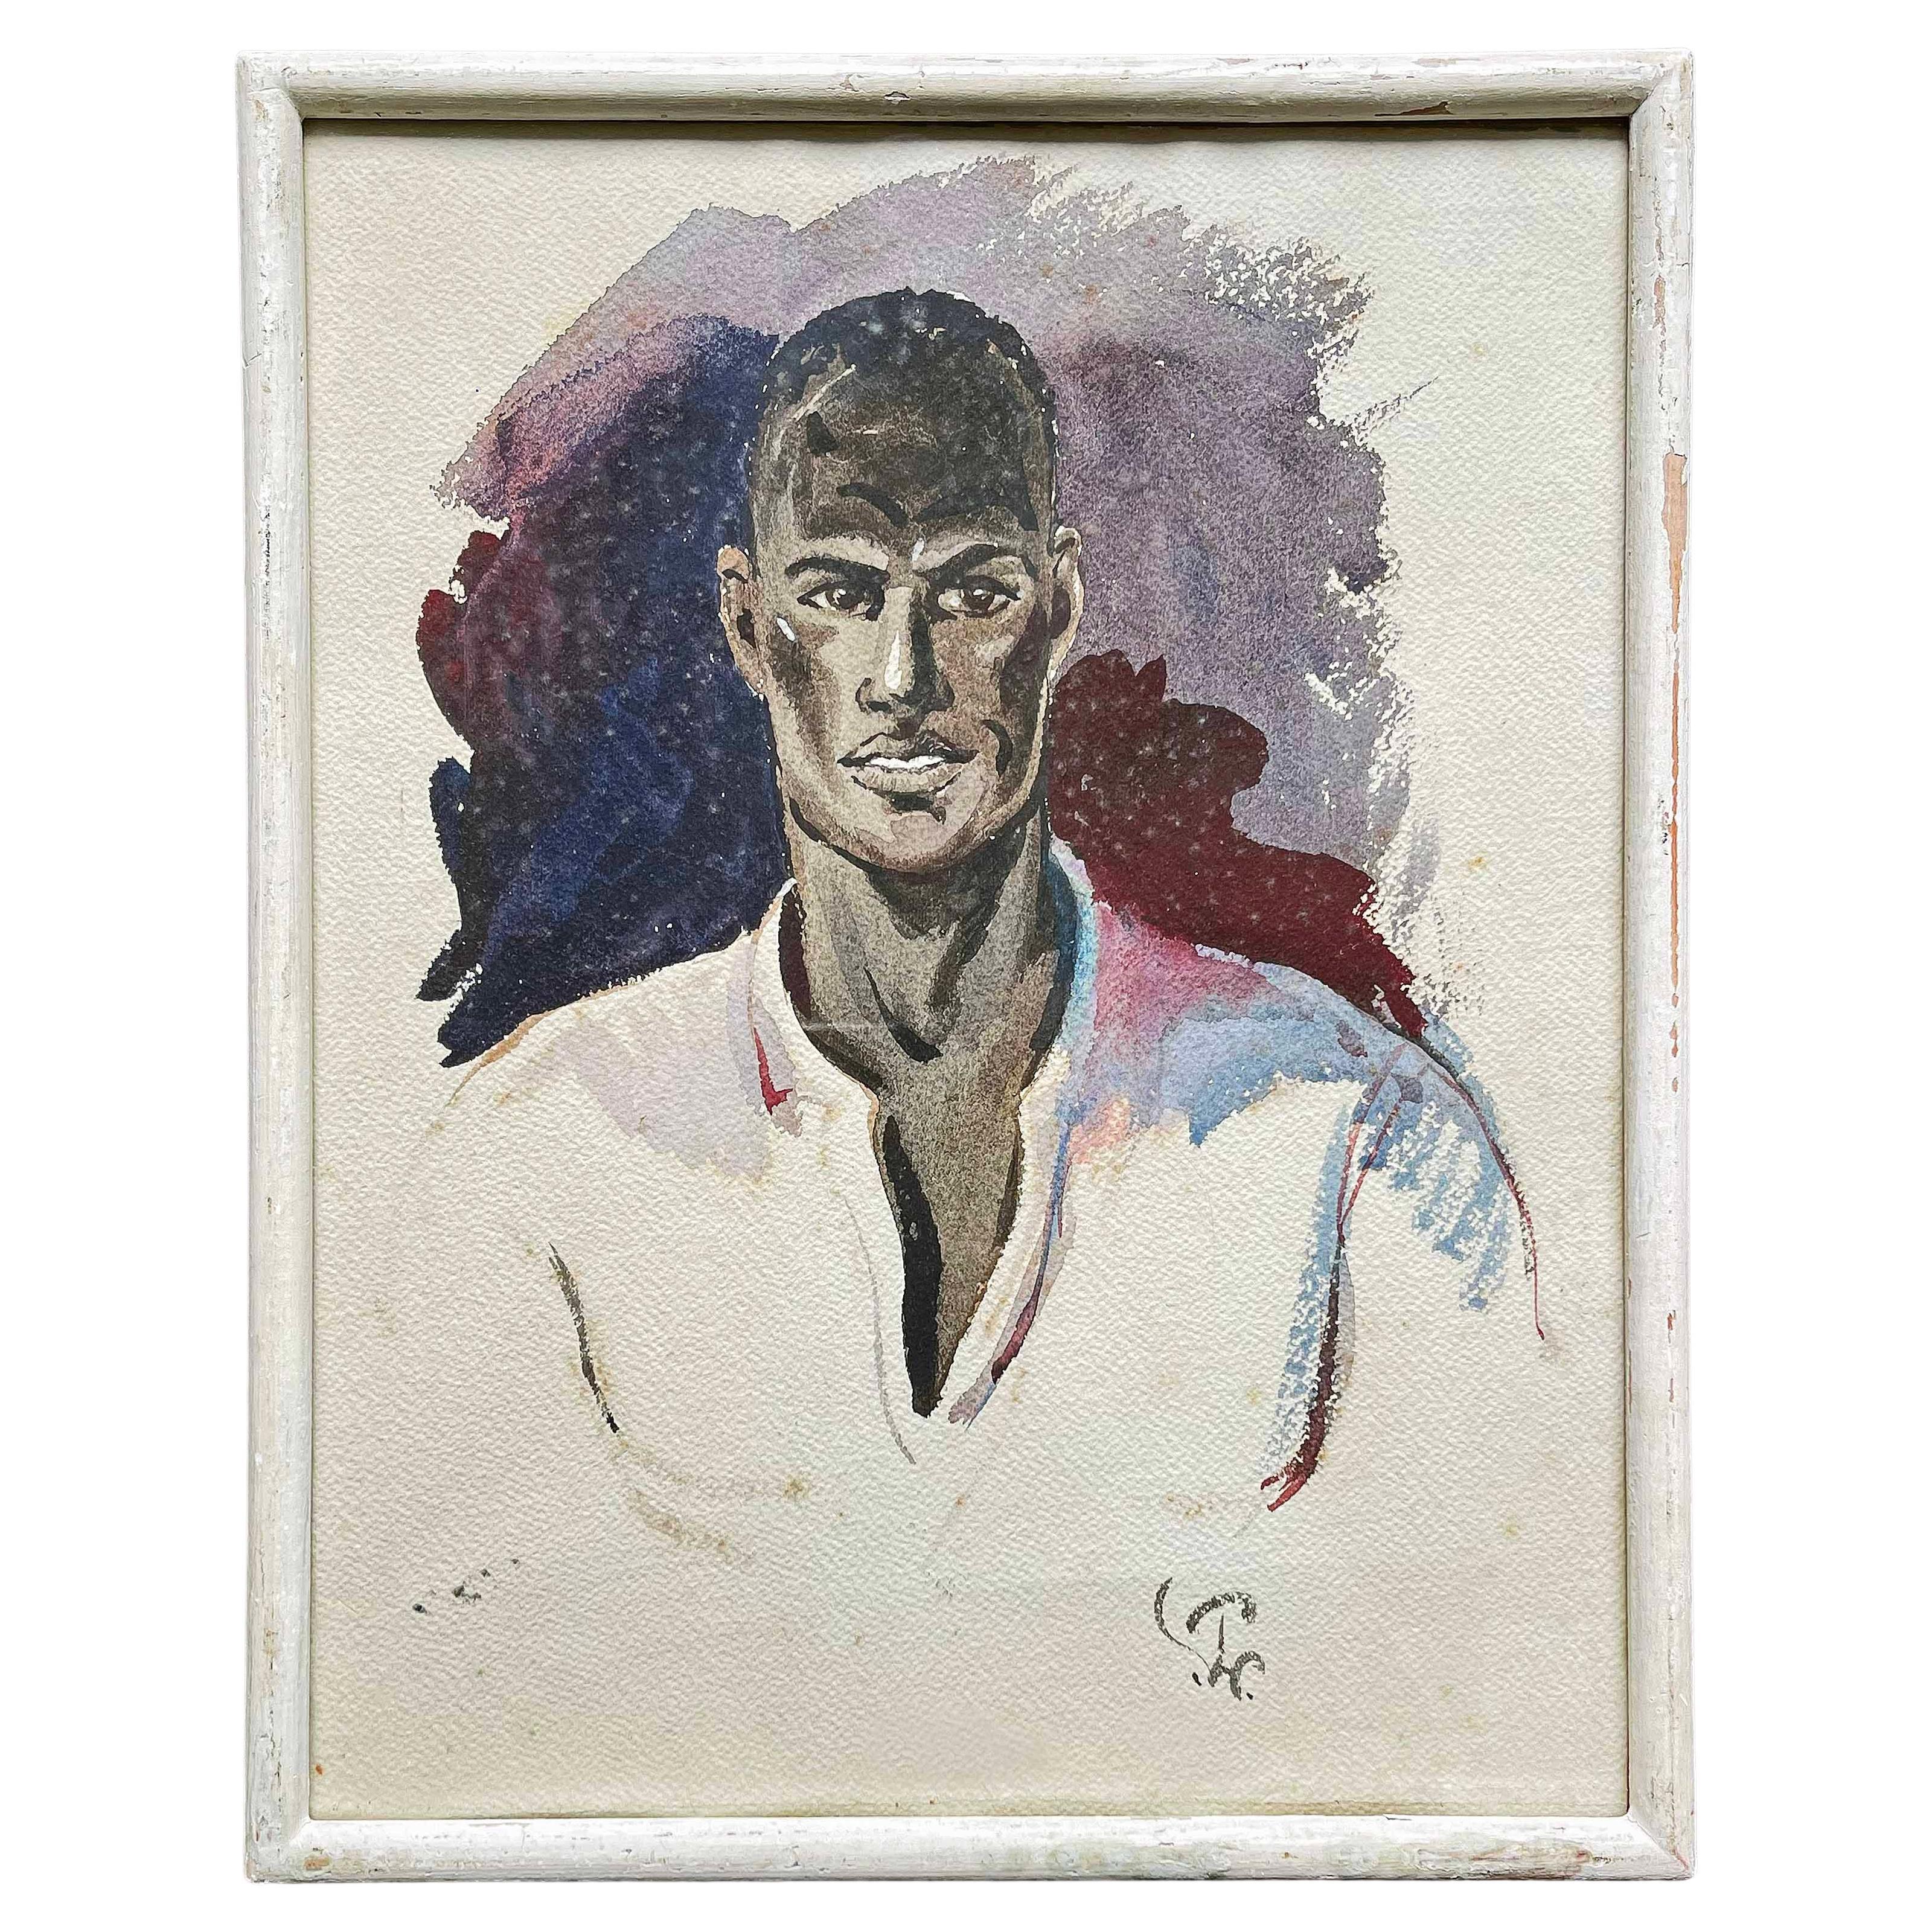 "Tunisian Man in White Shirt", 1930s Watercolor Painting by Porter Woodruff For Sale